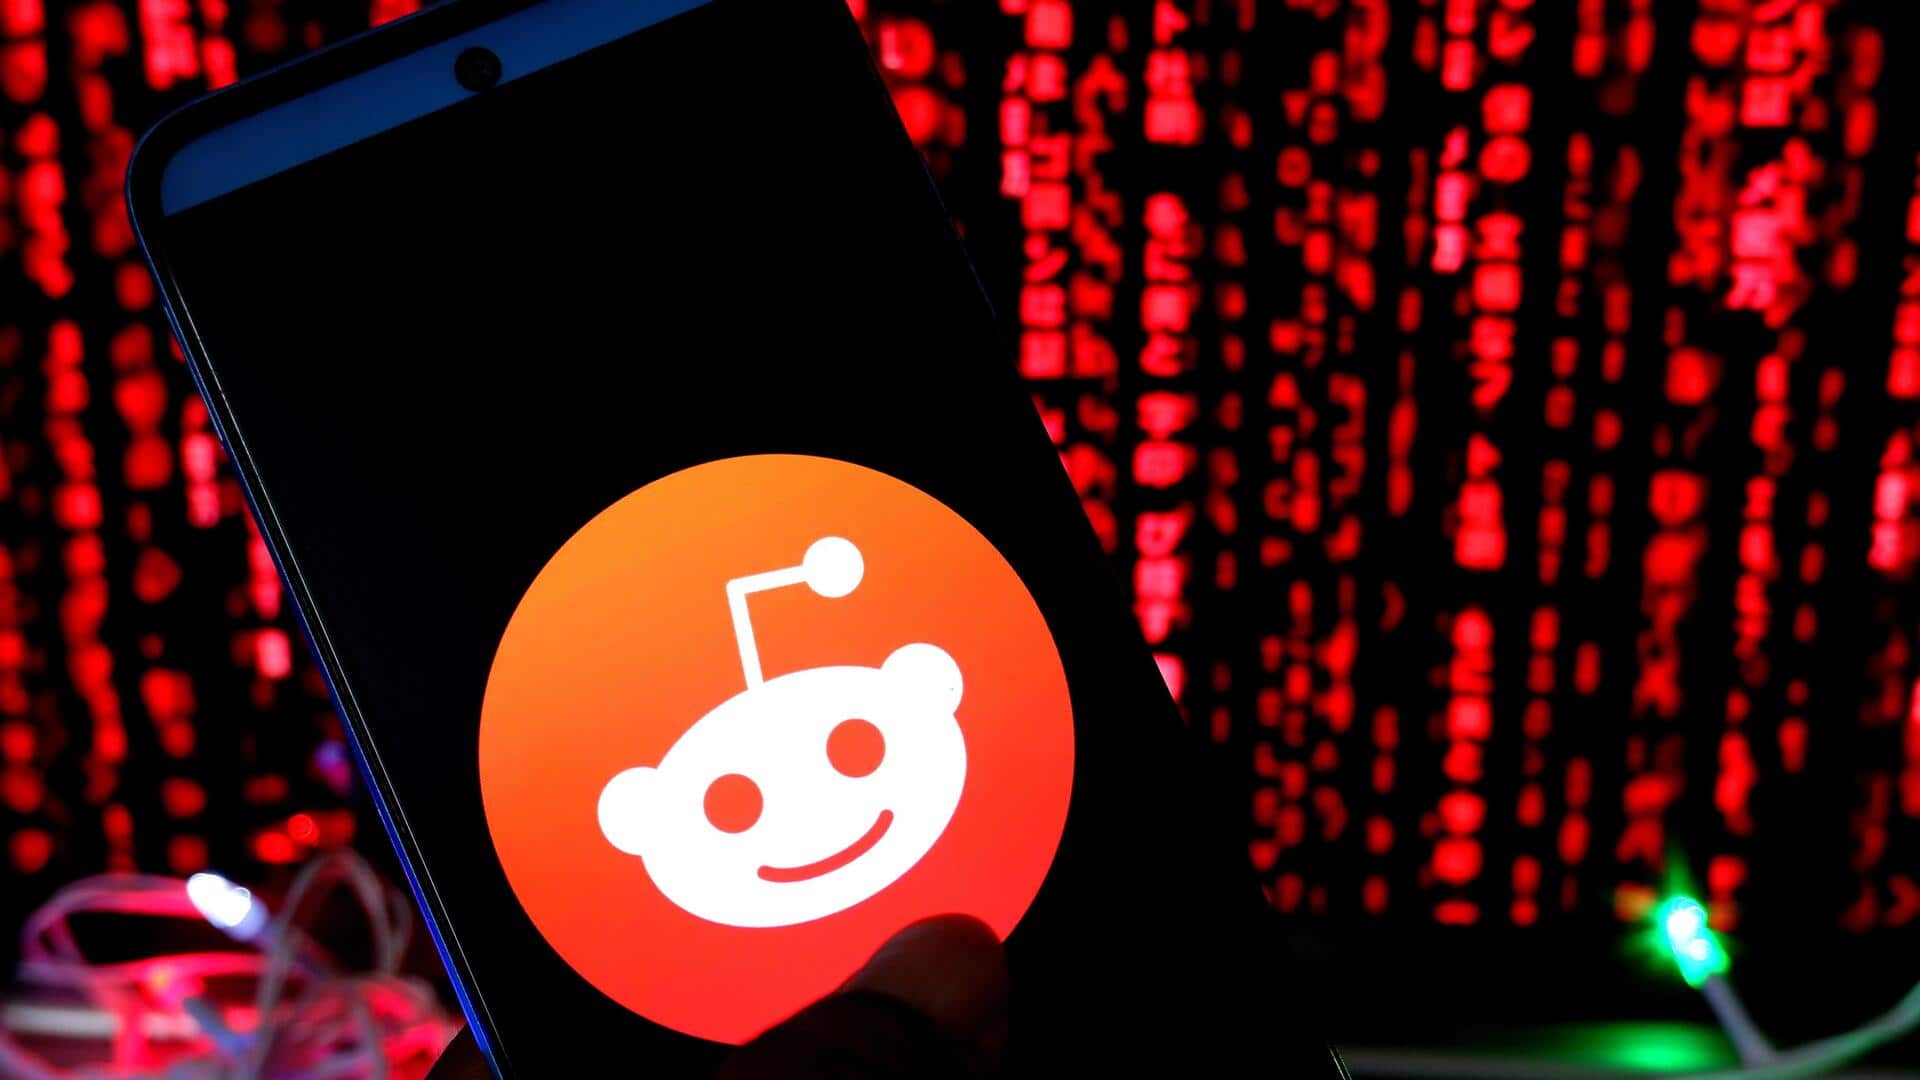 Reddit files for IPO, eyes NYSE listing under 'RDDT' ticker